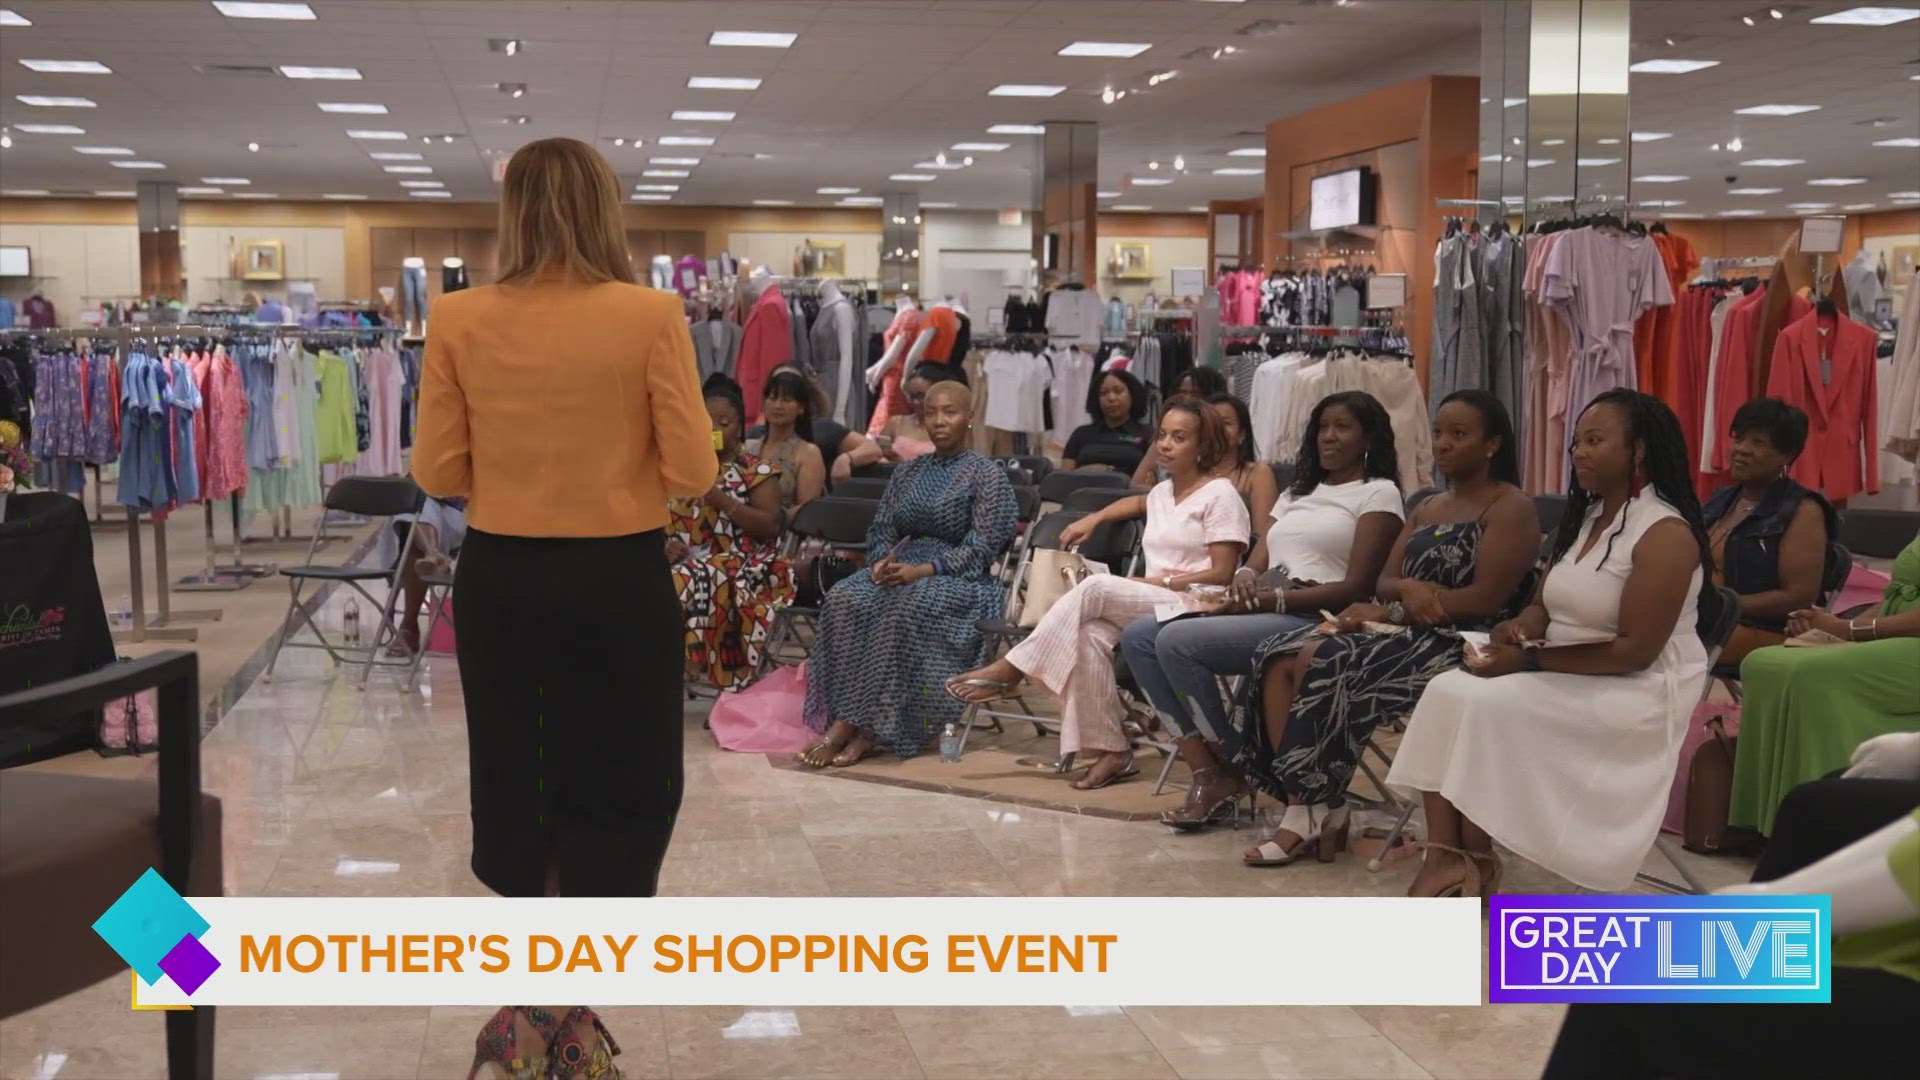 Sunday, May 5th local moms are invited to a Mother’s Day Shopping Experience at Dillard’s at Wiregrass Mall. Kiva Williams joined us with more.